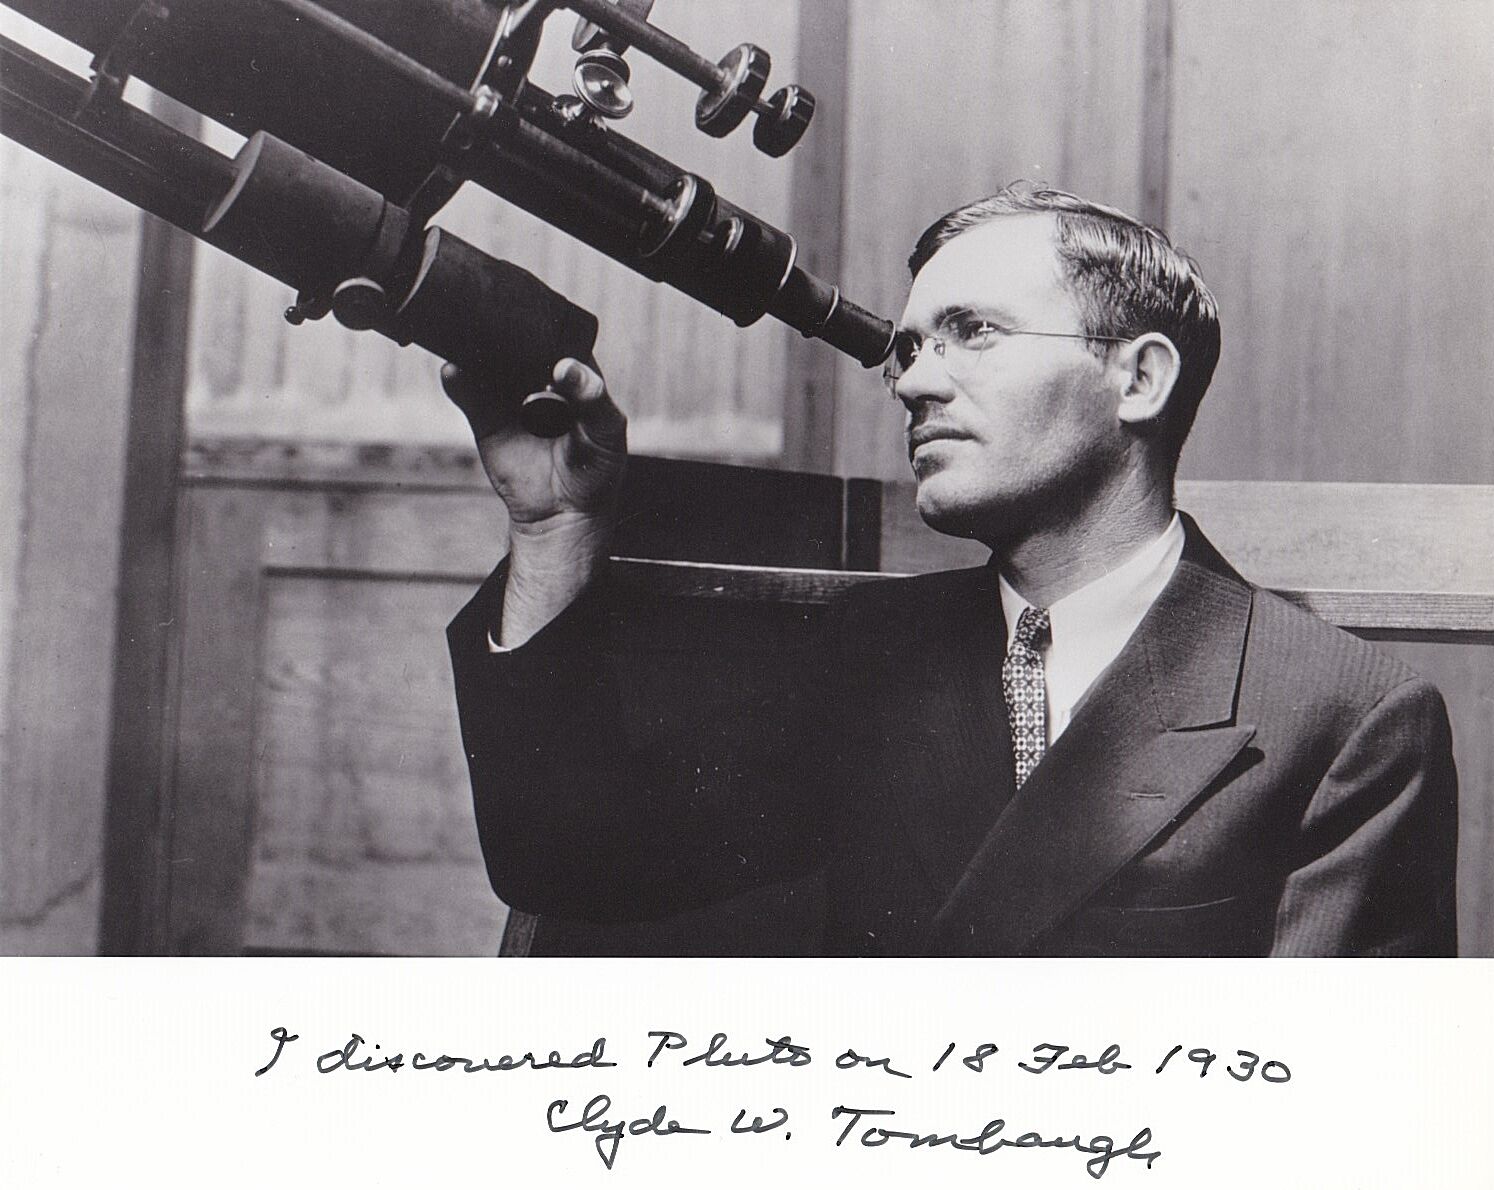  Clyde Tombaugh Discoverer of the 9th Planet, Pluto at Telescope 